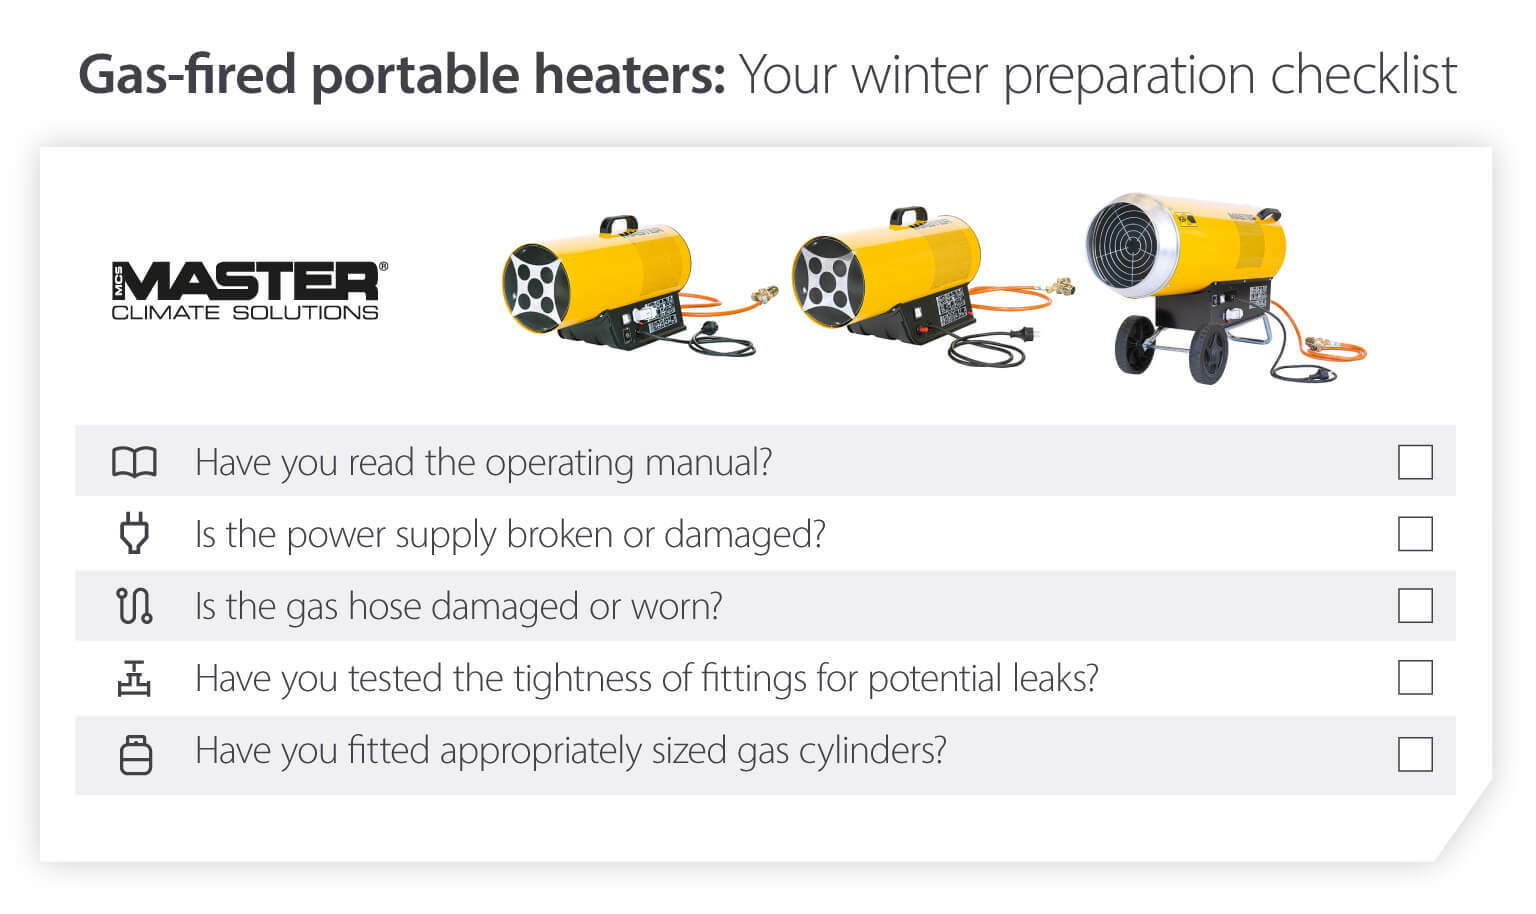 Winter gas fired portable heater preparation checklist list to ensure heaters work in cold temperatures - Infographic image